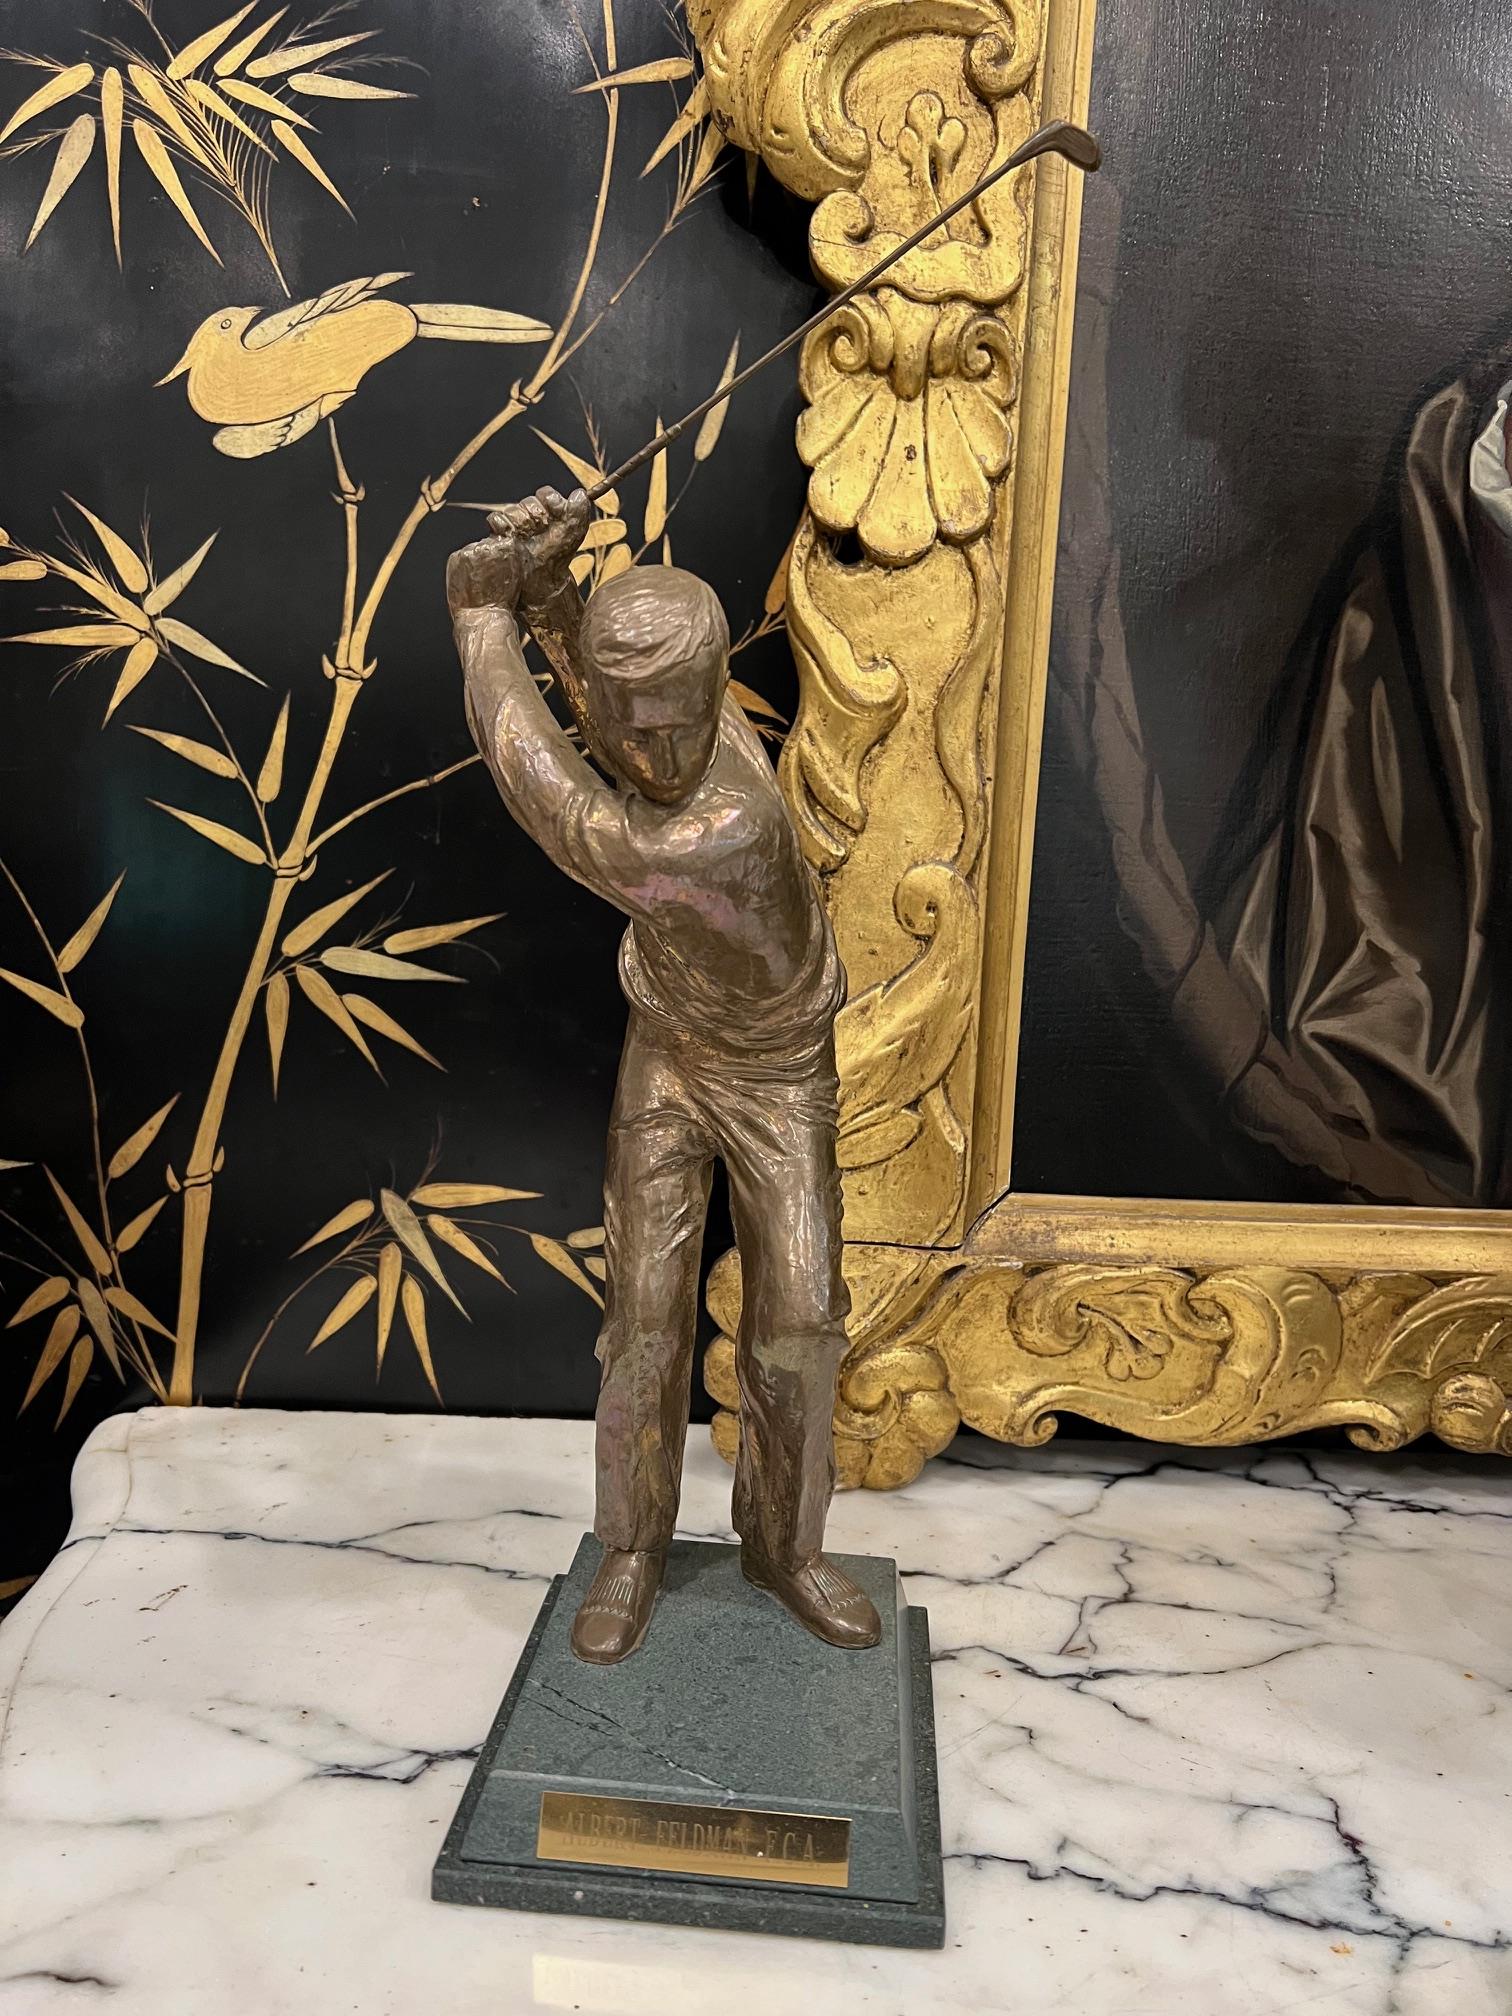 TWO BRONZE FIGURES OF GOLFERS - Image 3 of 4